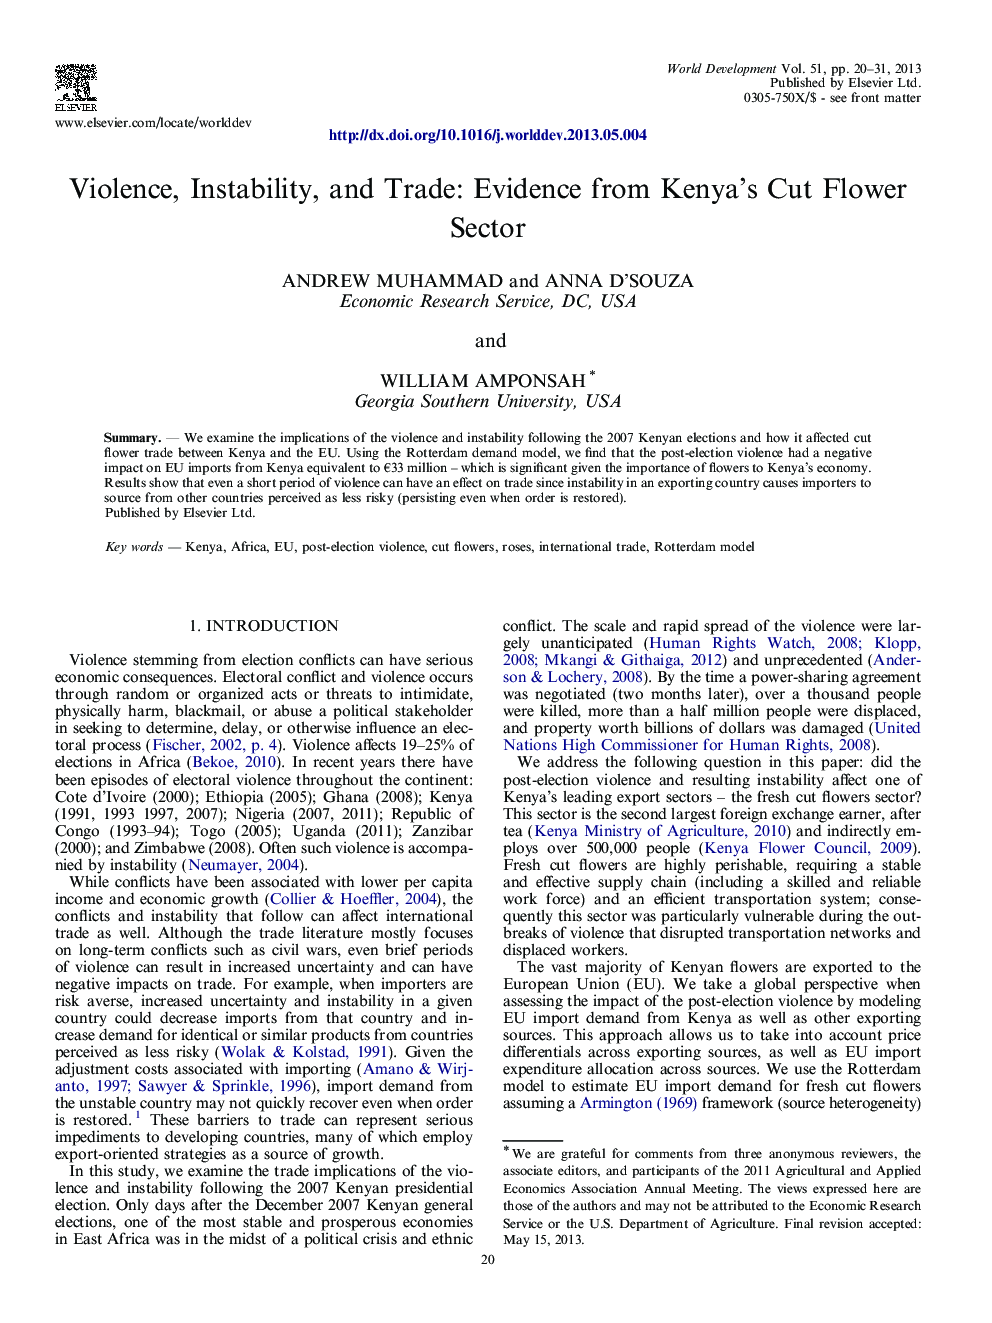 Violence, Instability, and Trade: Evidence from Kenya's Cut Flower Sector